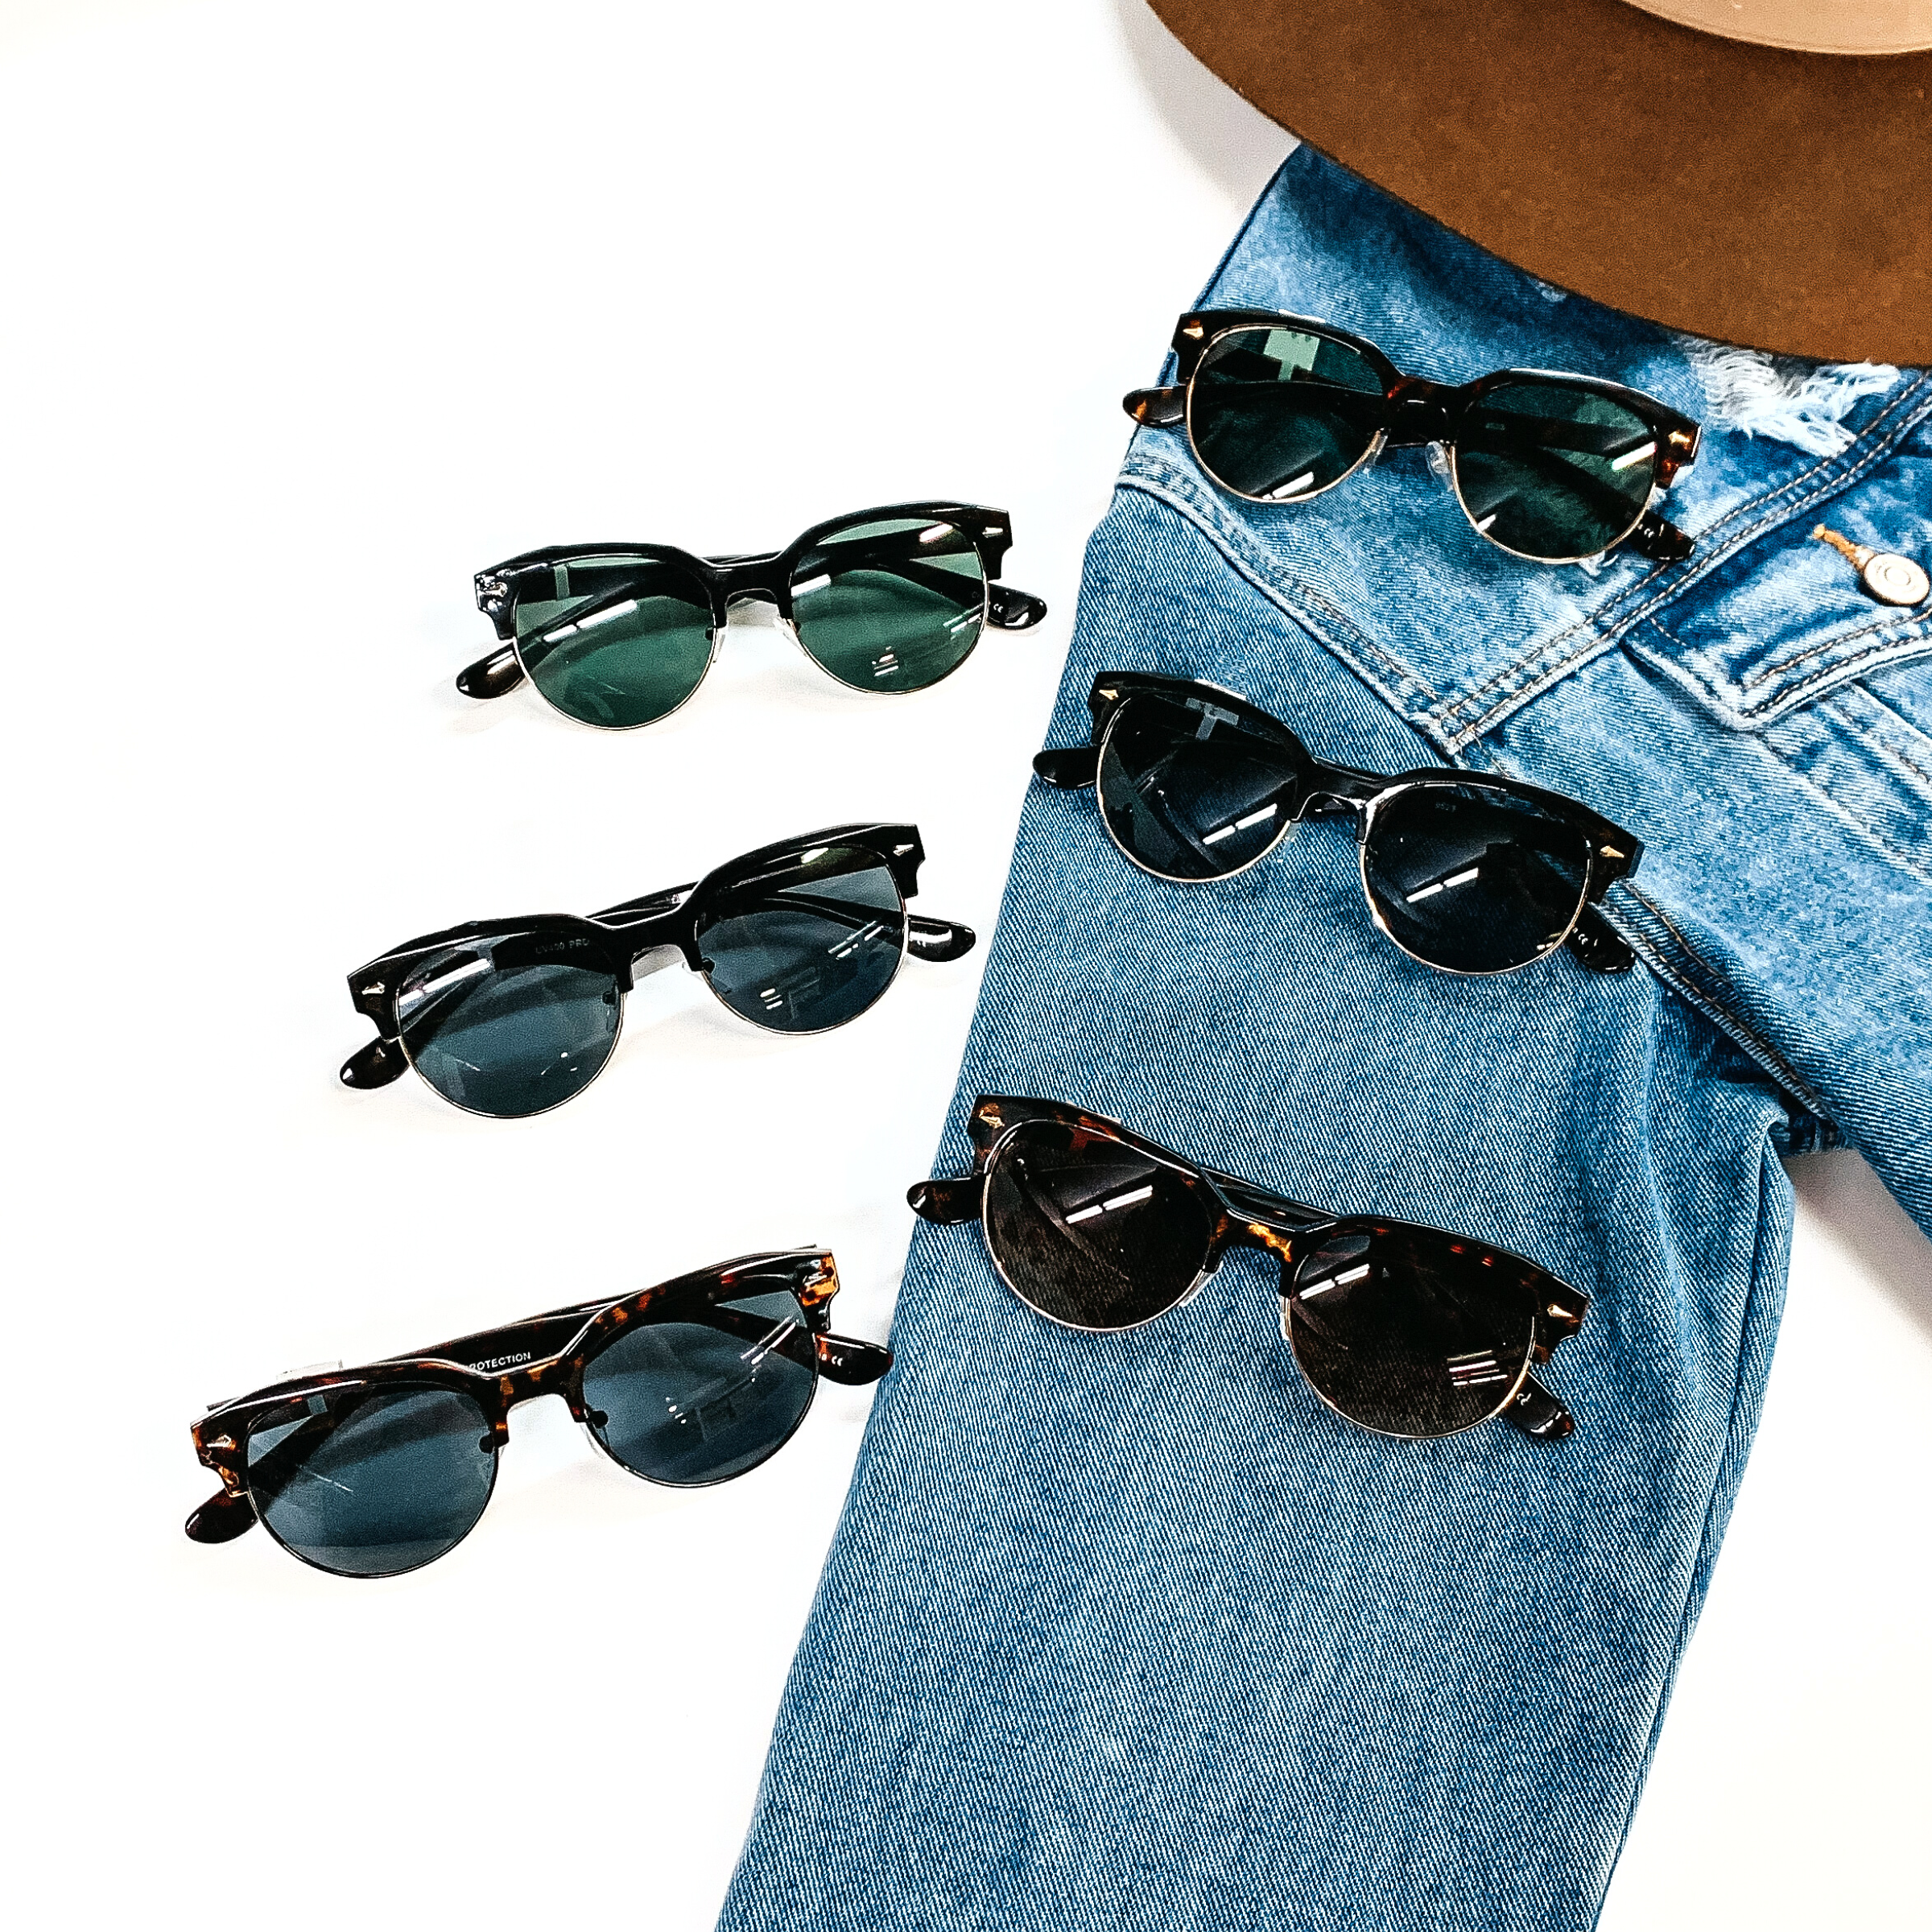 There are six pairs of browline sunglasses in different colors/print such as  tortouise print and black with different color lenses as well. These sunglasses are  taken on a white background and jean jacket sleeve with a dark brown felt hat on the  top as decor.